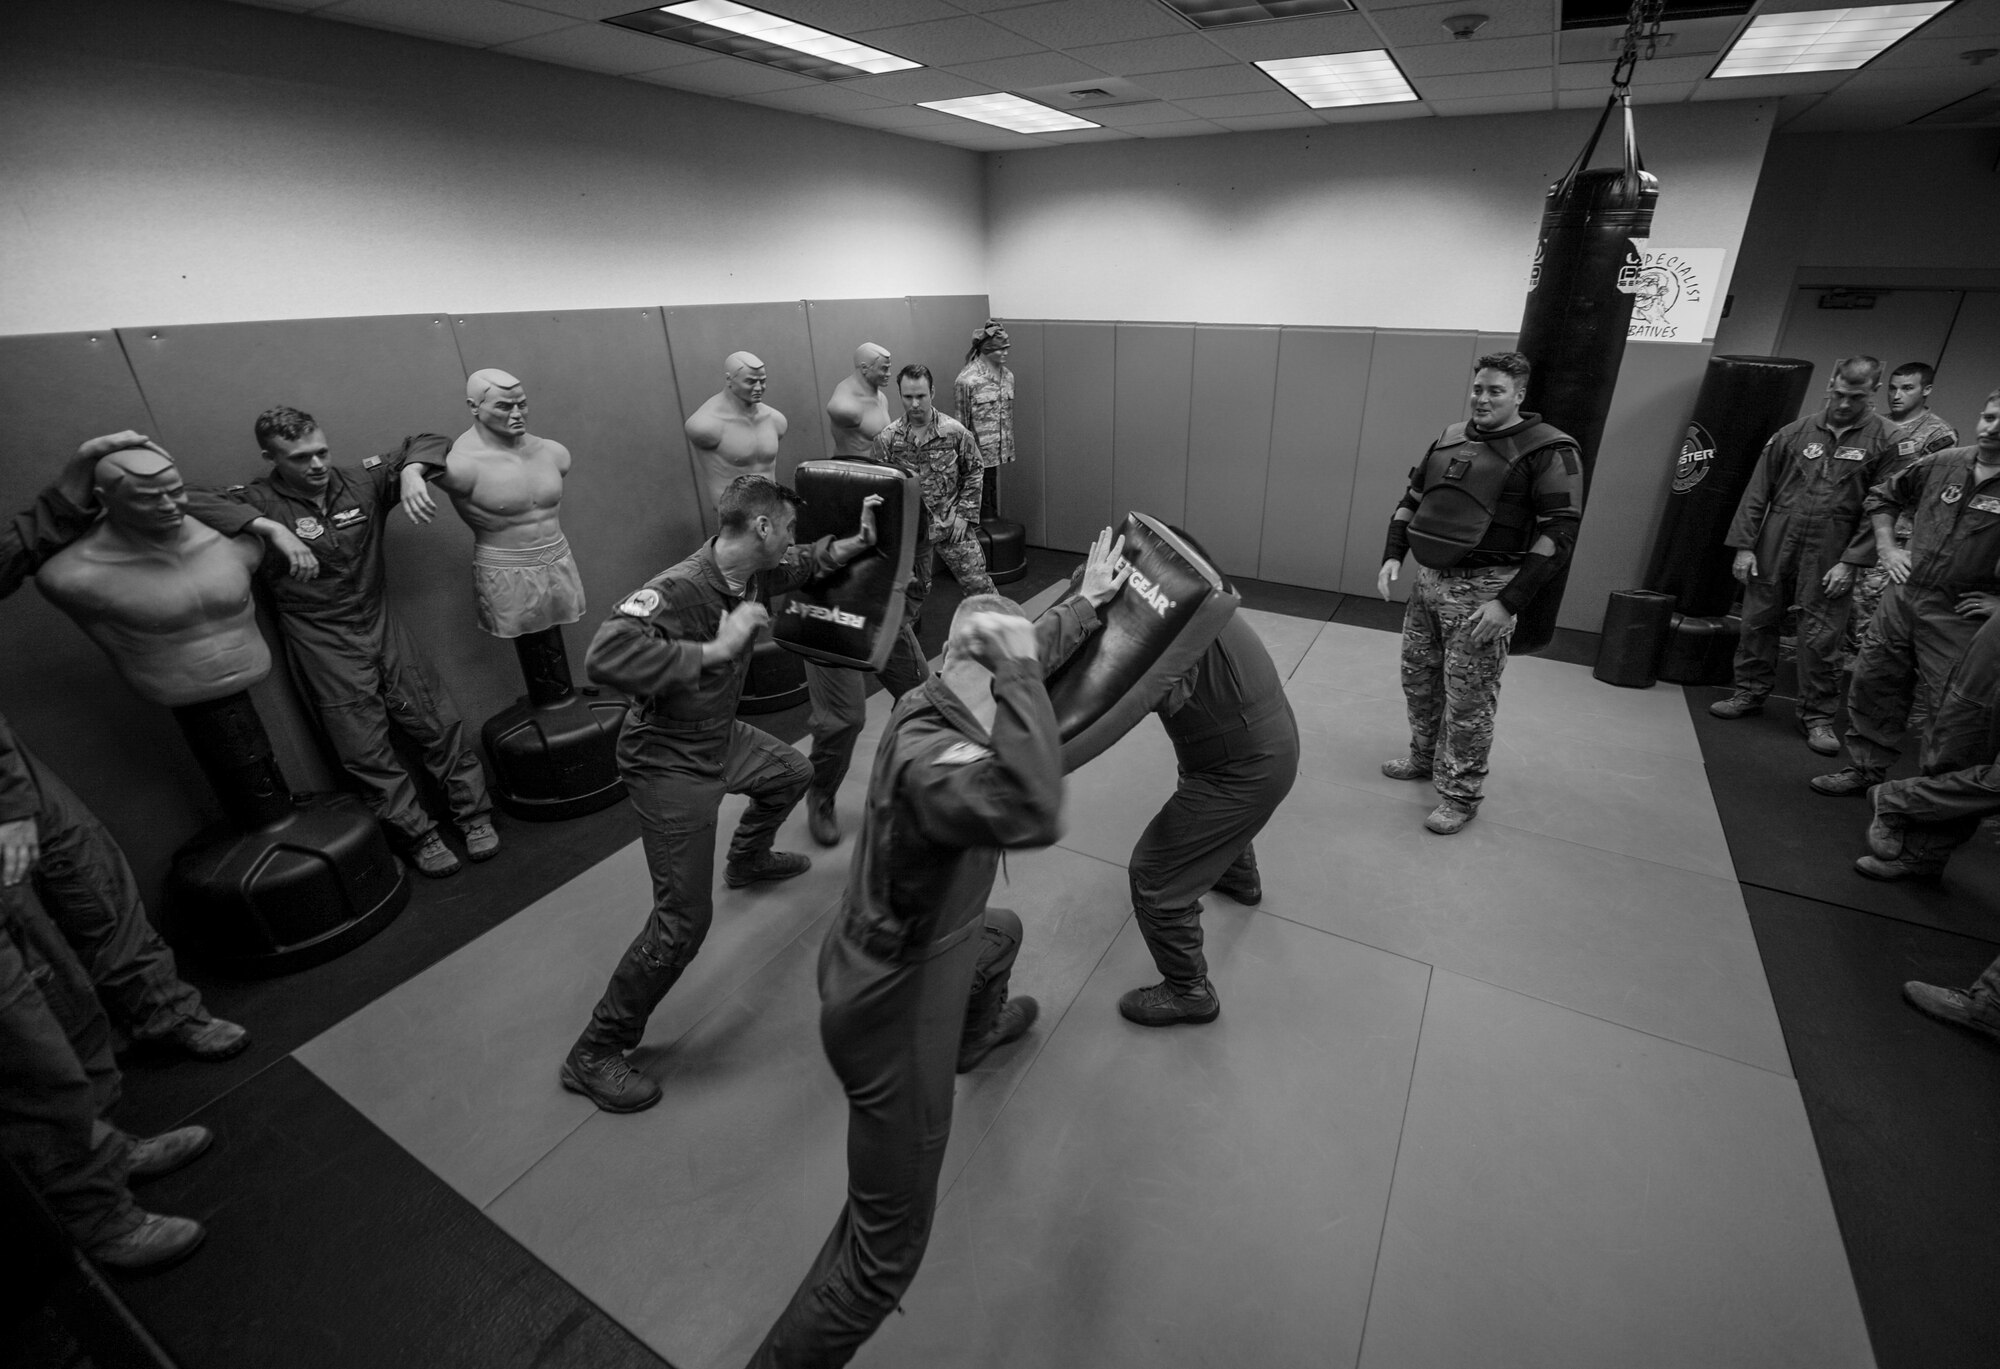 U.S. Air Force C-130J aircrew members practice combative techniques June 21, 2016, at Little Rock Air Force Base, Ark. C-130J pilots and loadmasters routinely undergo resistance and escape tactics in case they find themselves in hostile areas. (U.S. Air Force photo by Senior Airman Harry Brexel)